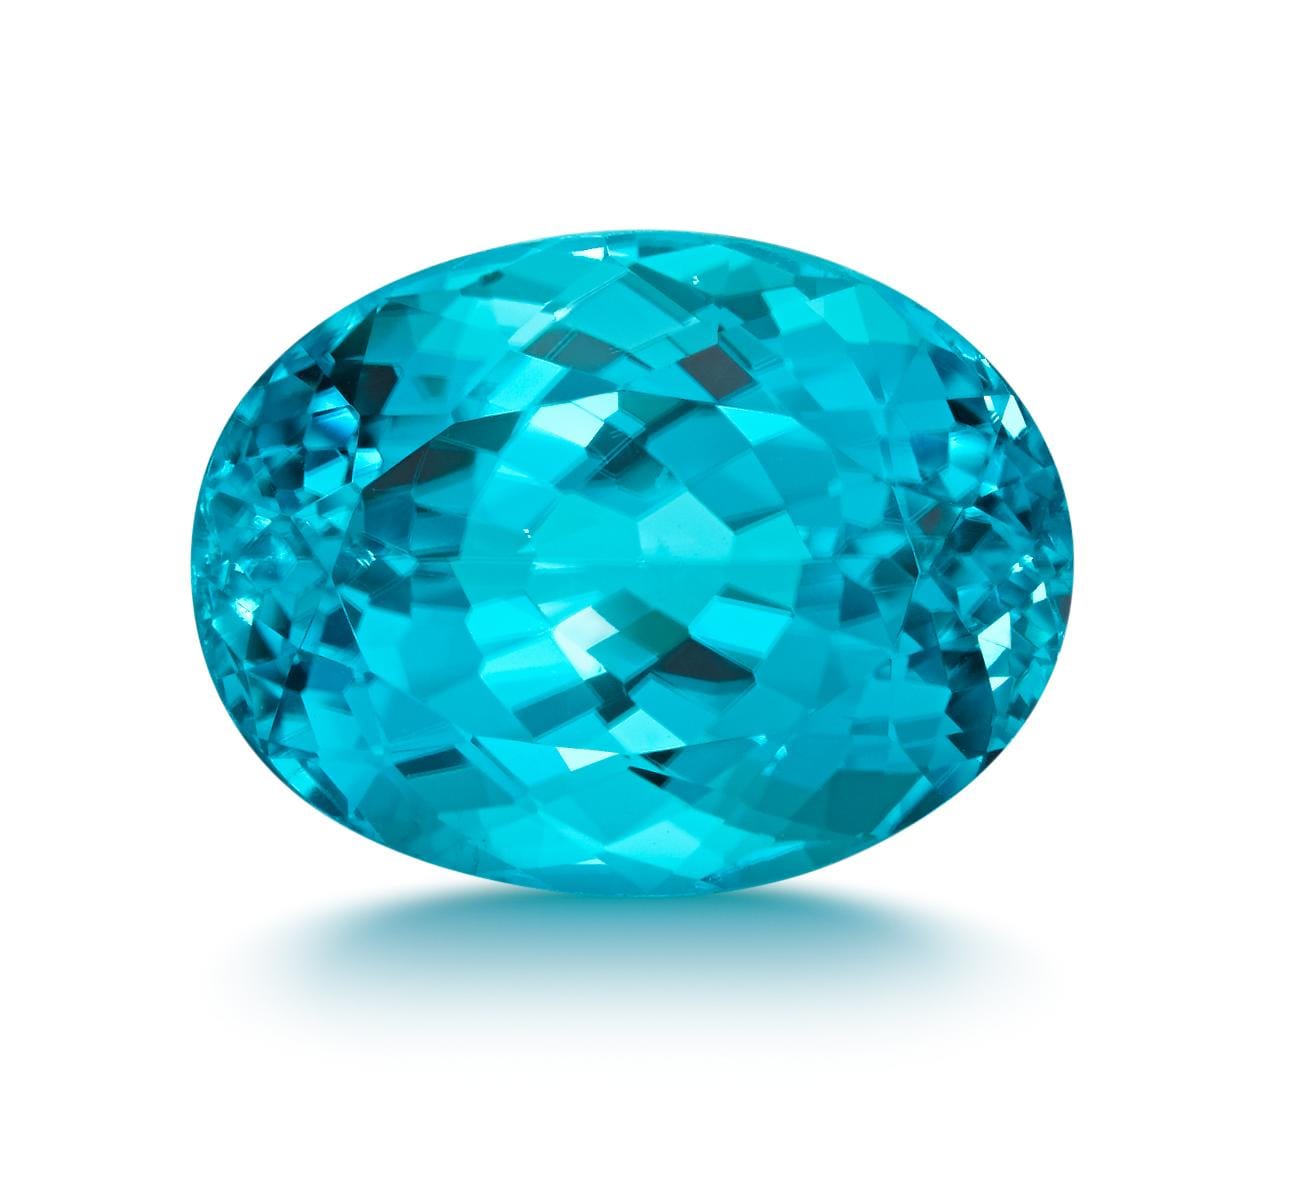 A blue oval gem on a white background Description automatically generated